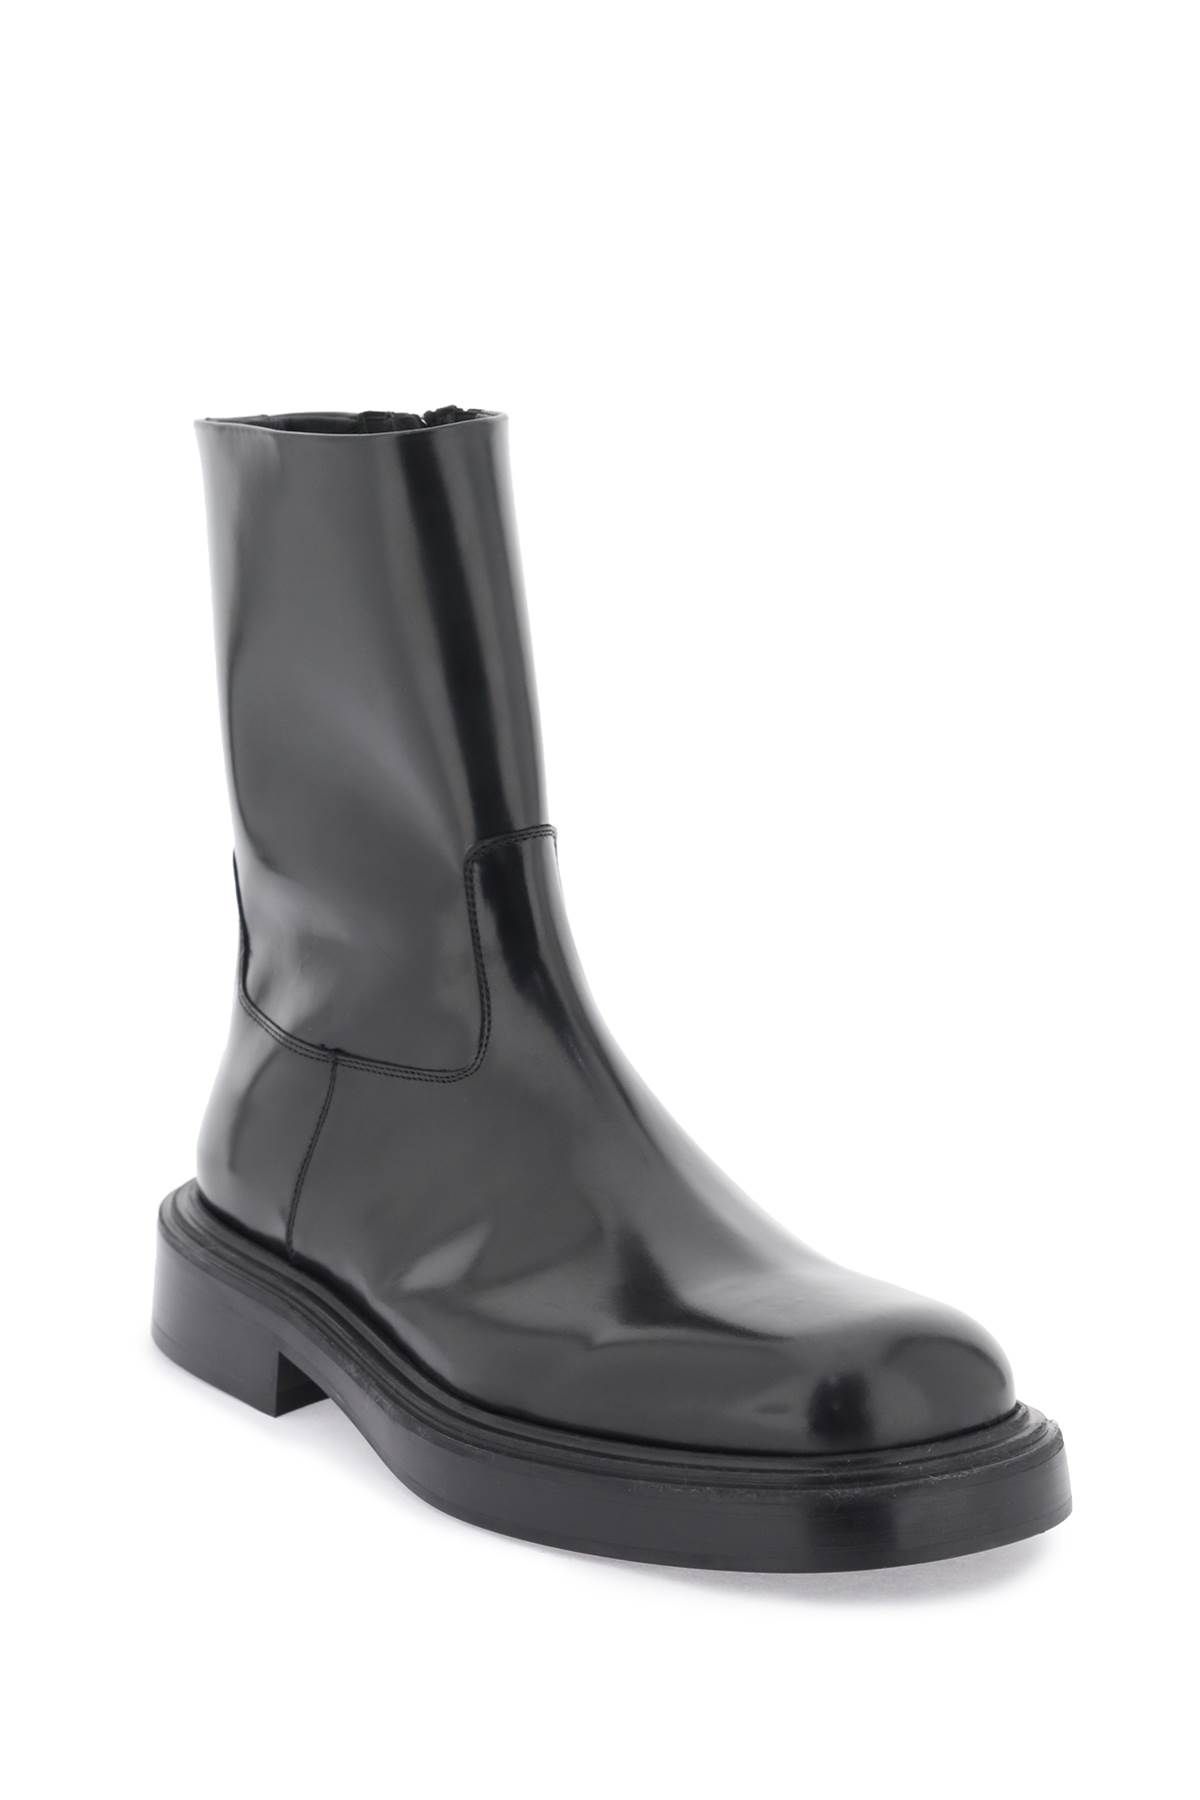 Shop Ferragamo Leather Zippered Boots In Black